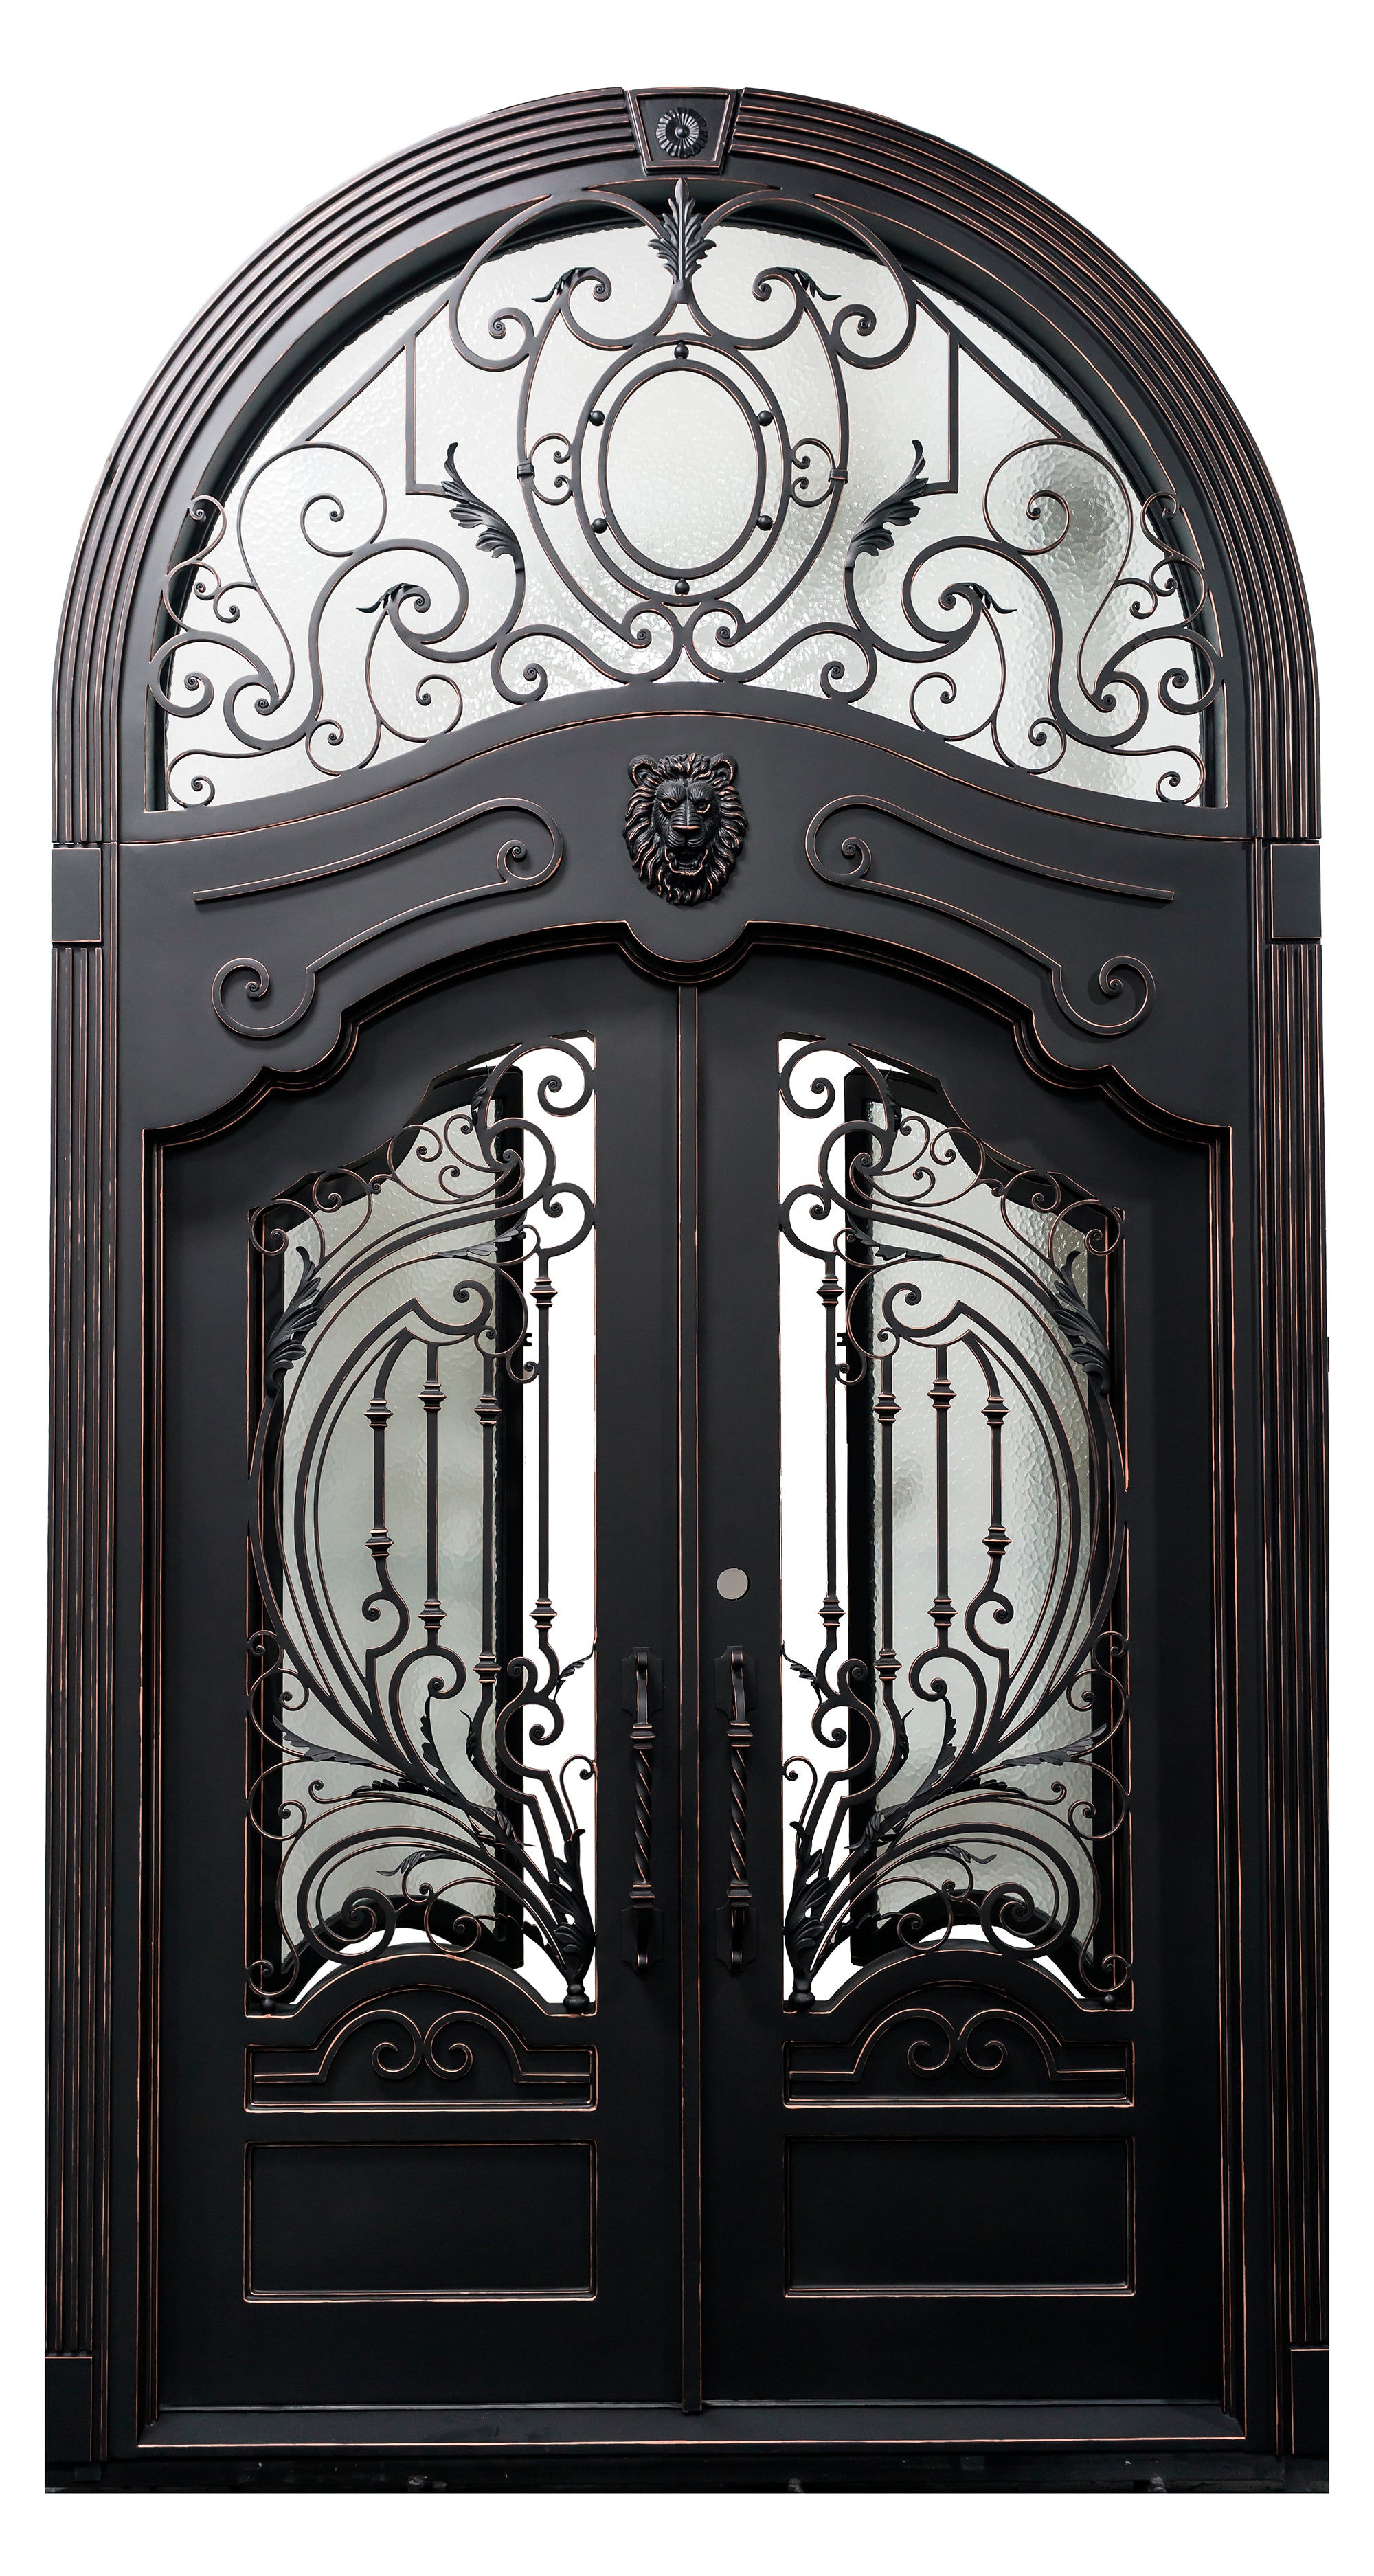 Brady Model Front Entry Door With Transom 72 By 144 Matt Black With Copper Finish